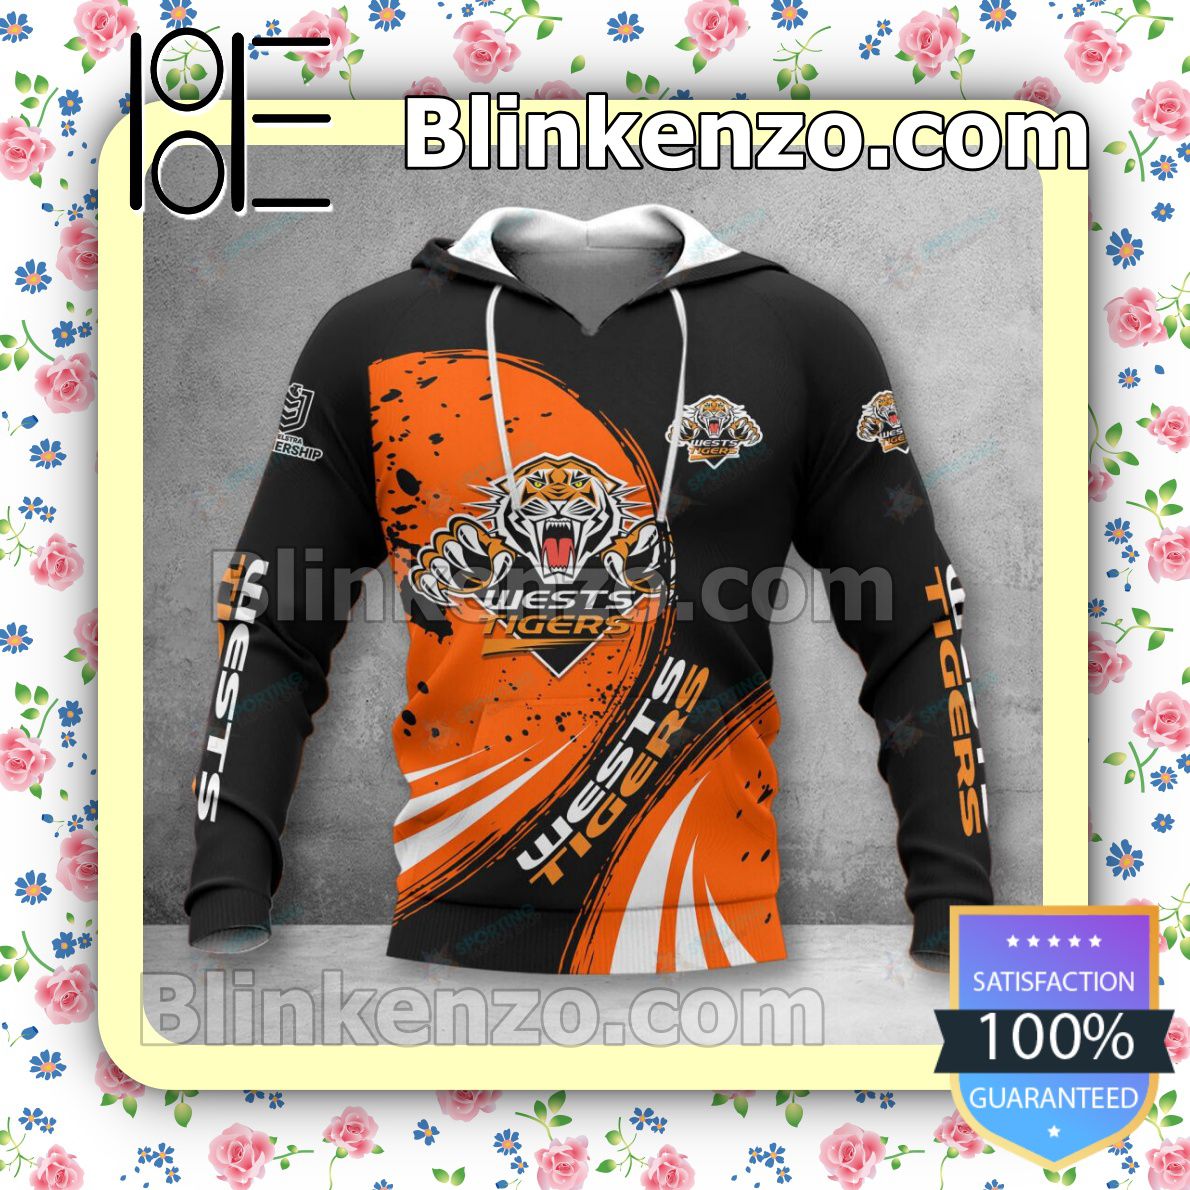 Wests Tigers T-shirt, Christmas Sweater